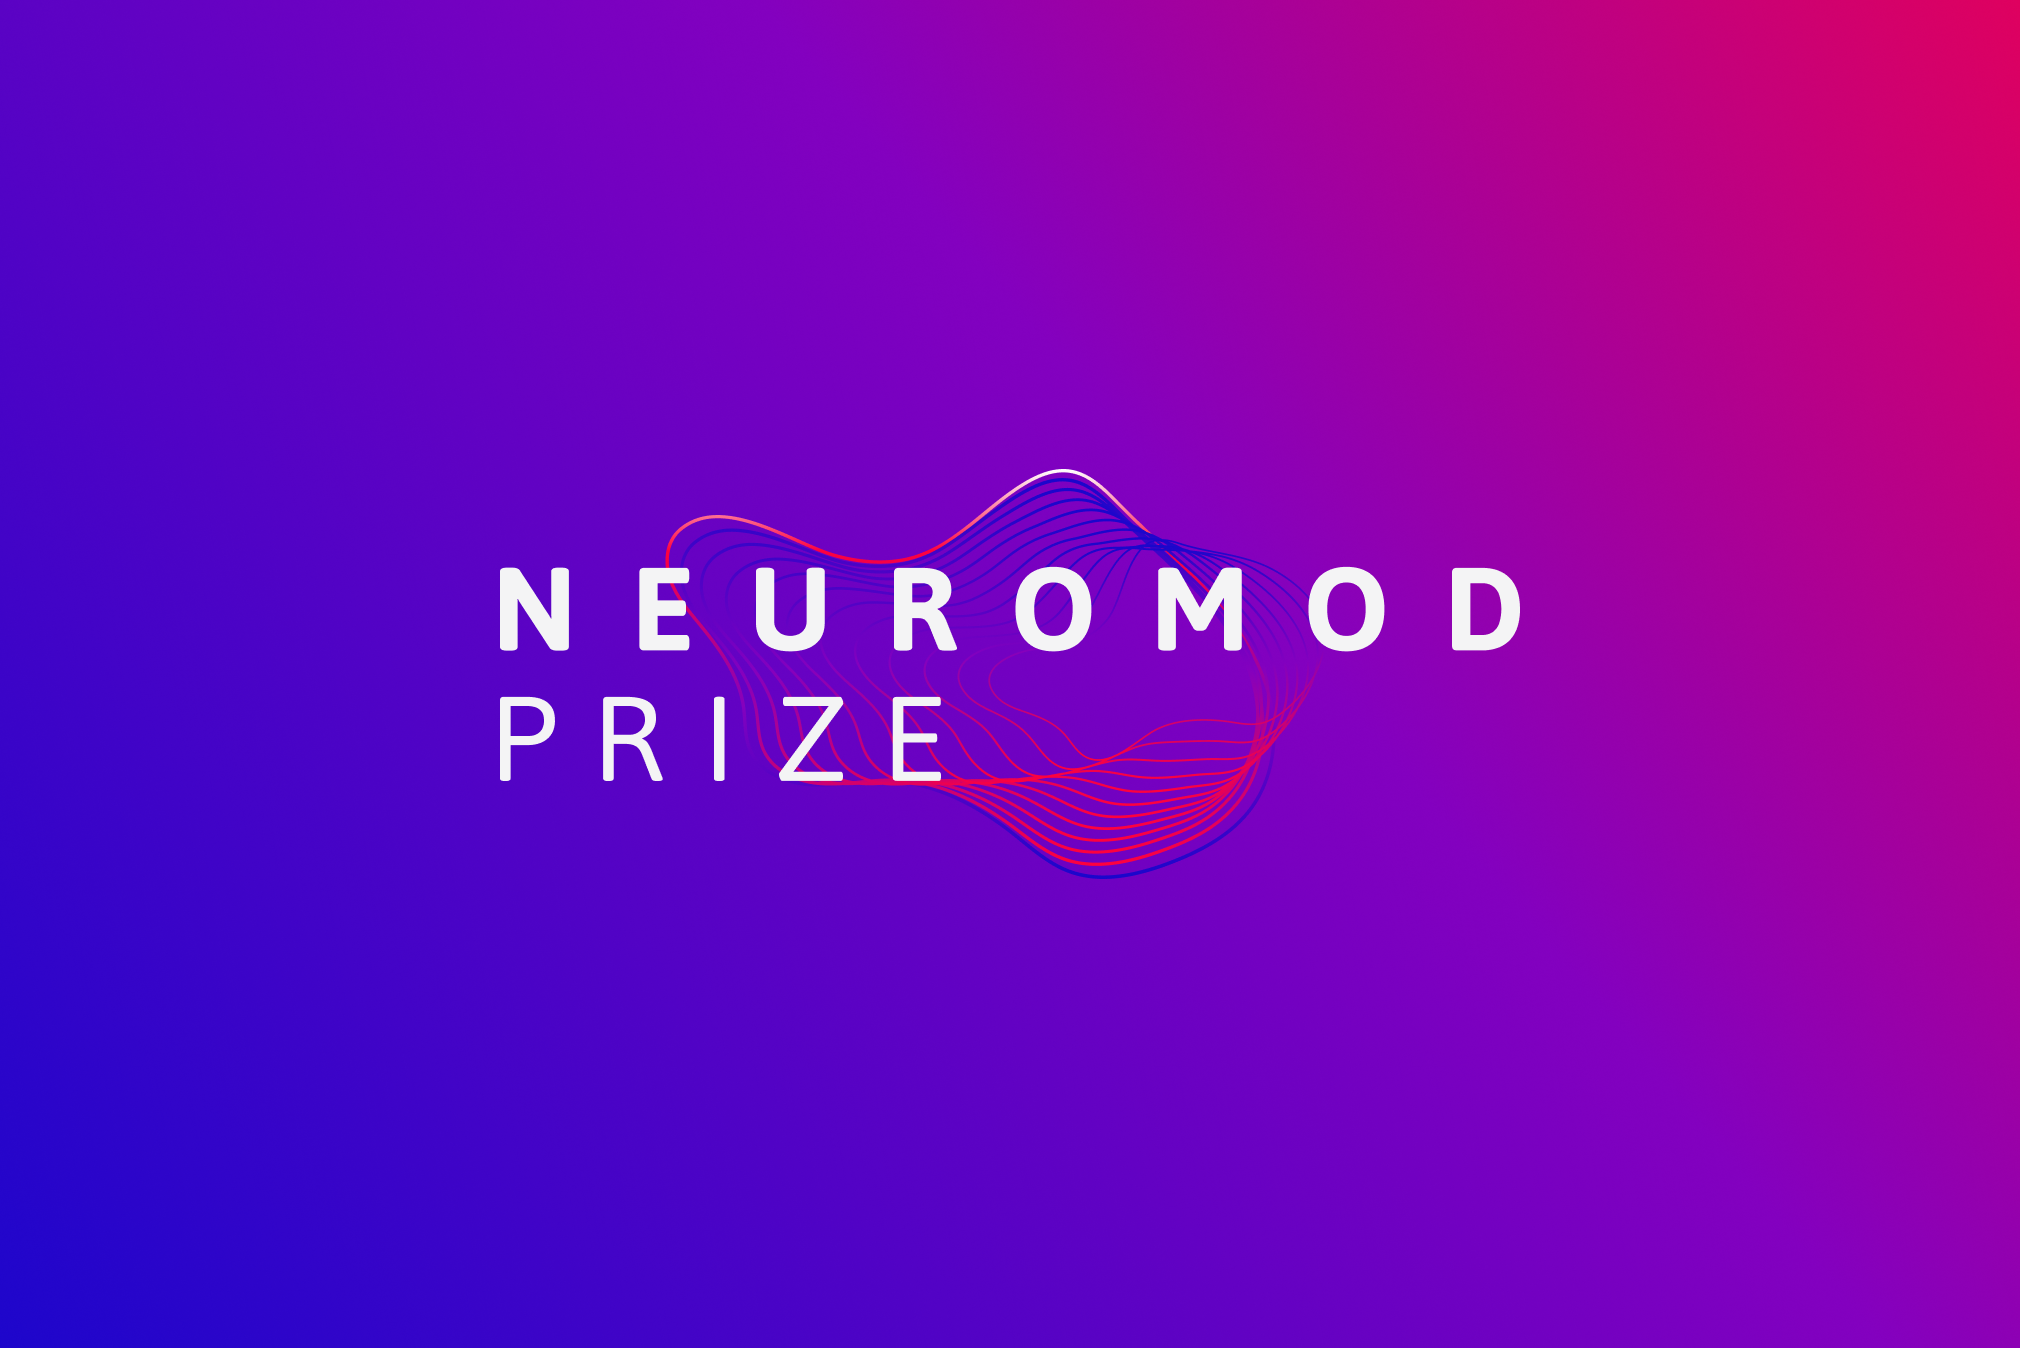 Neuromod Prize brings new solutions one step closer to patients